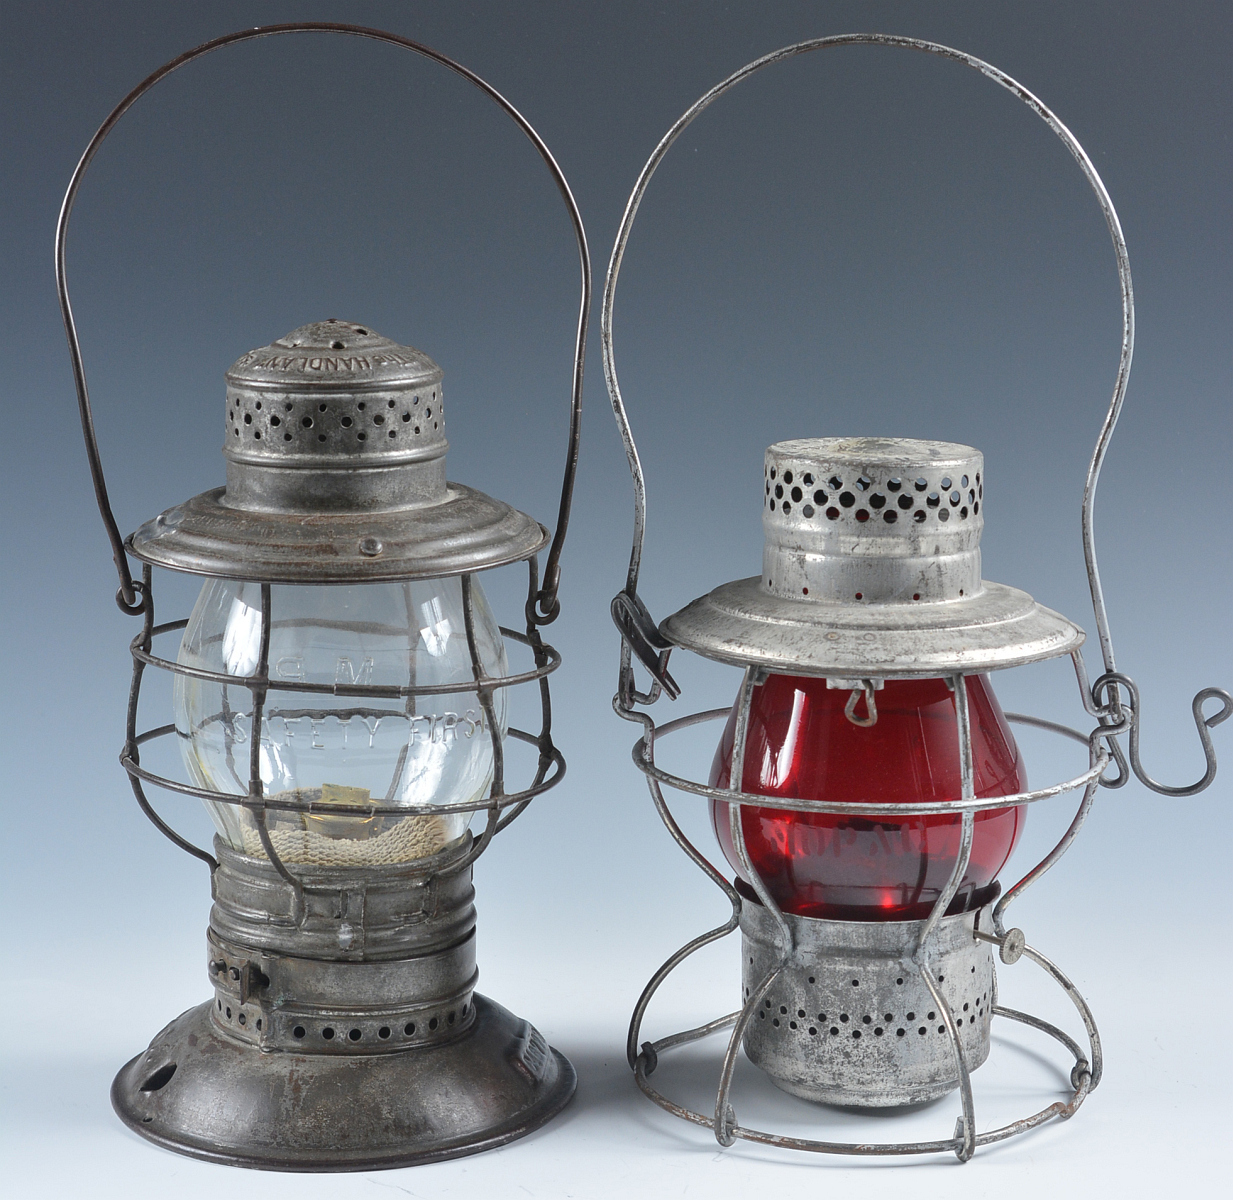 MISSOURI PACIFIC RR LANTERNS, ONE CLEAR GLOBE, ONE RED